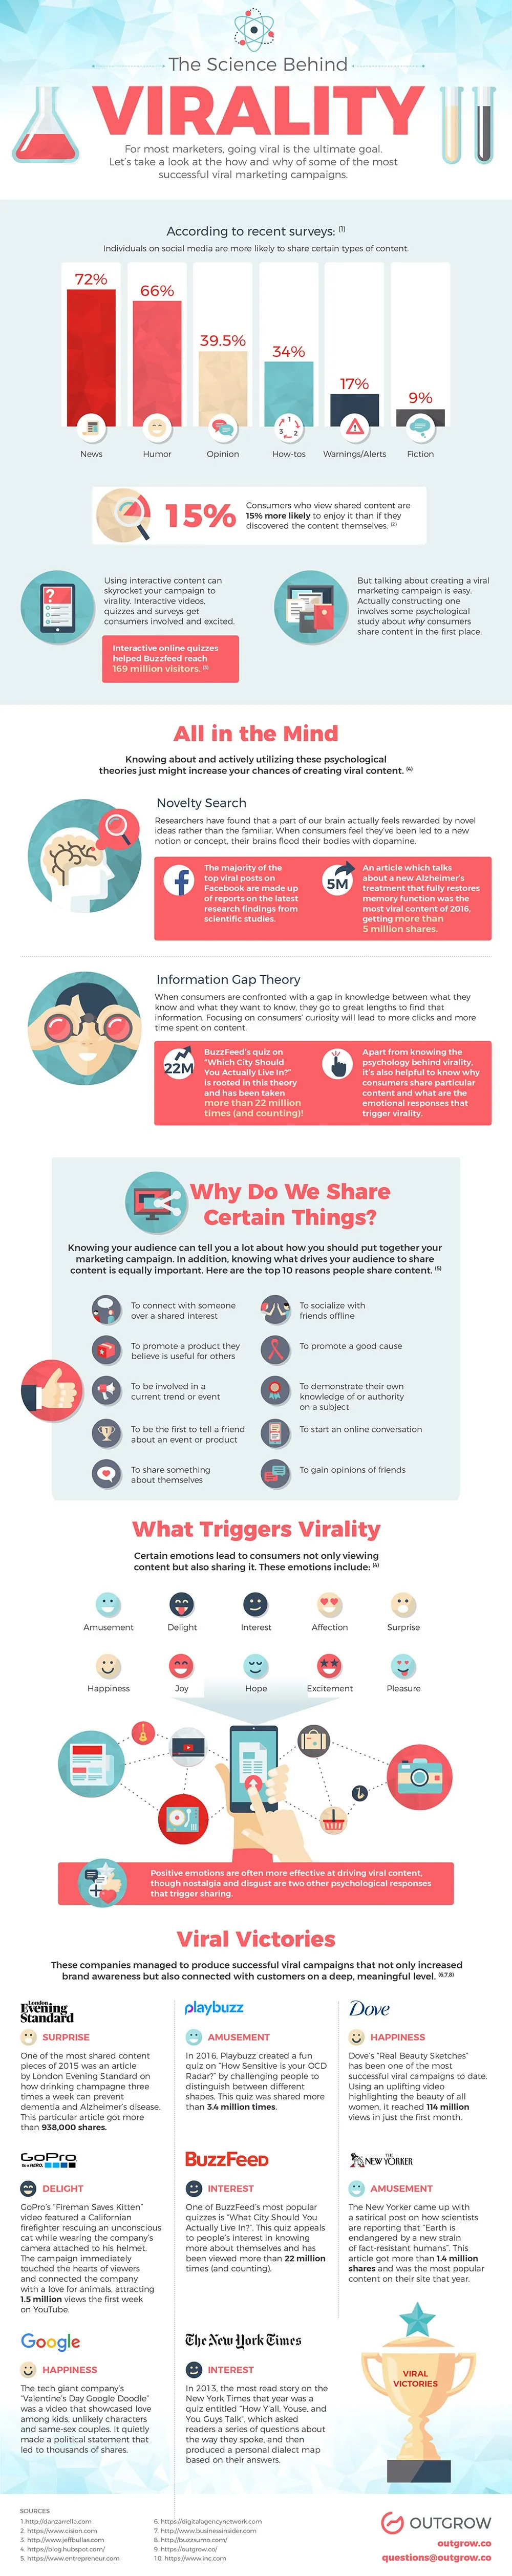 The Science Behind Virality - #Infographic